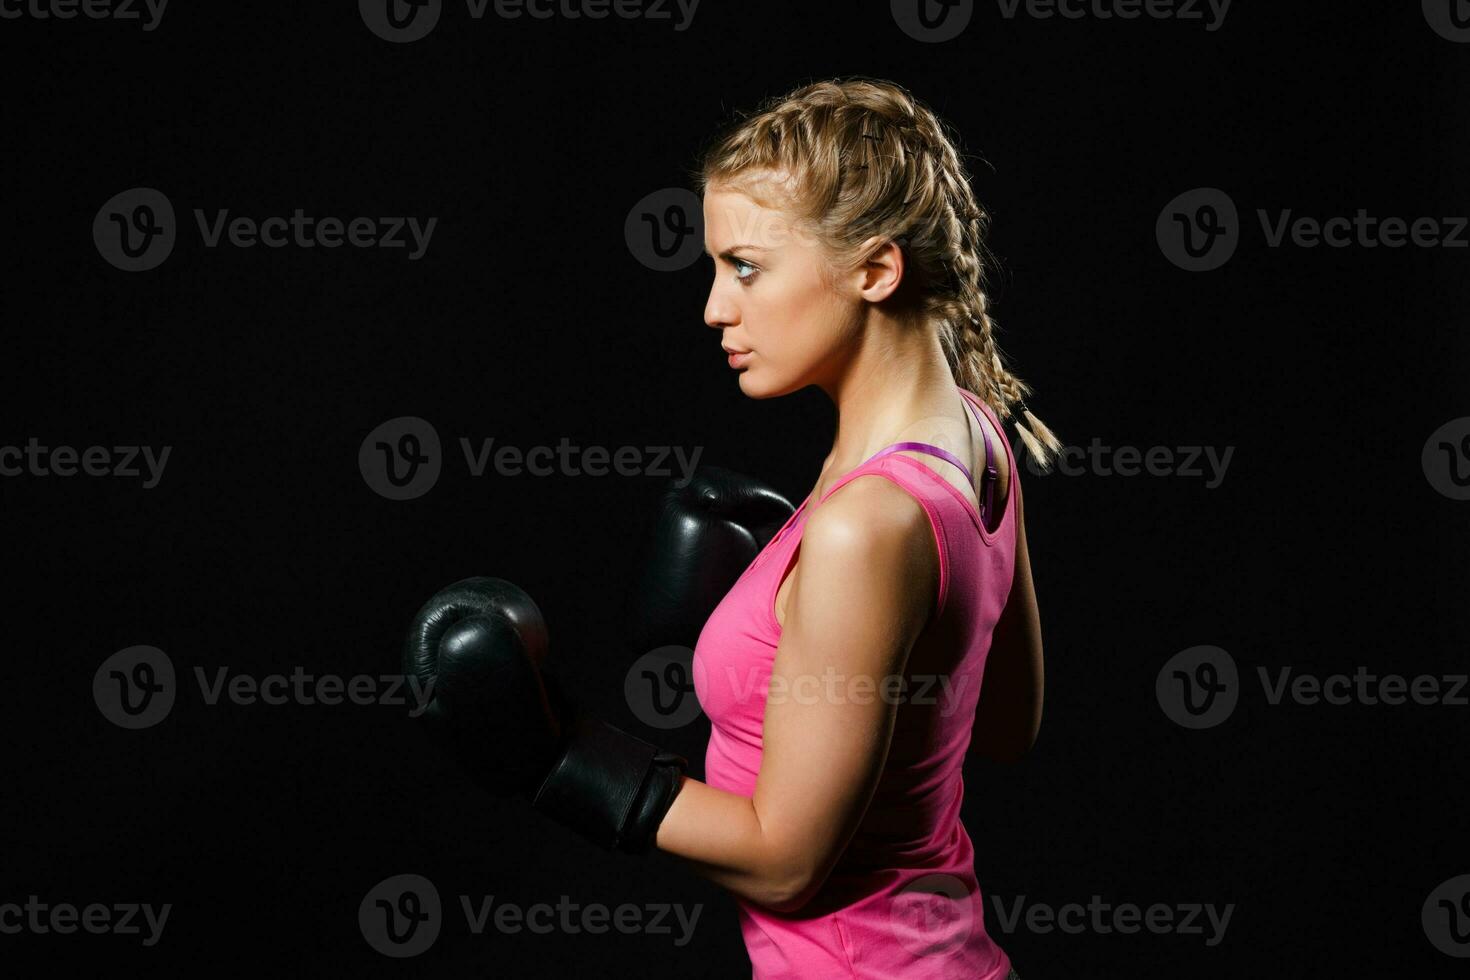 Beautiful determined woman with boxing gloves. photo